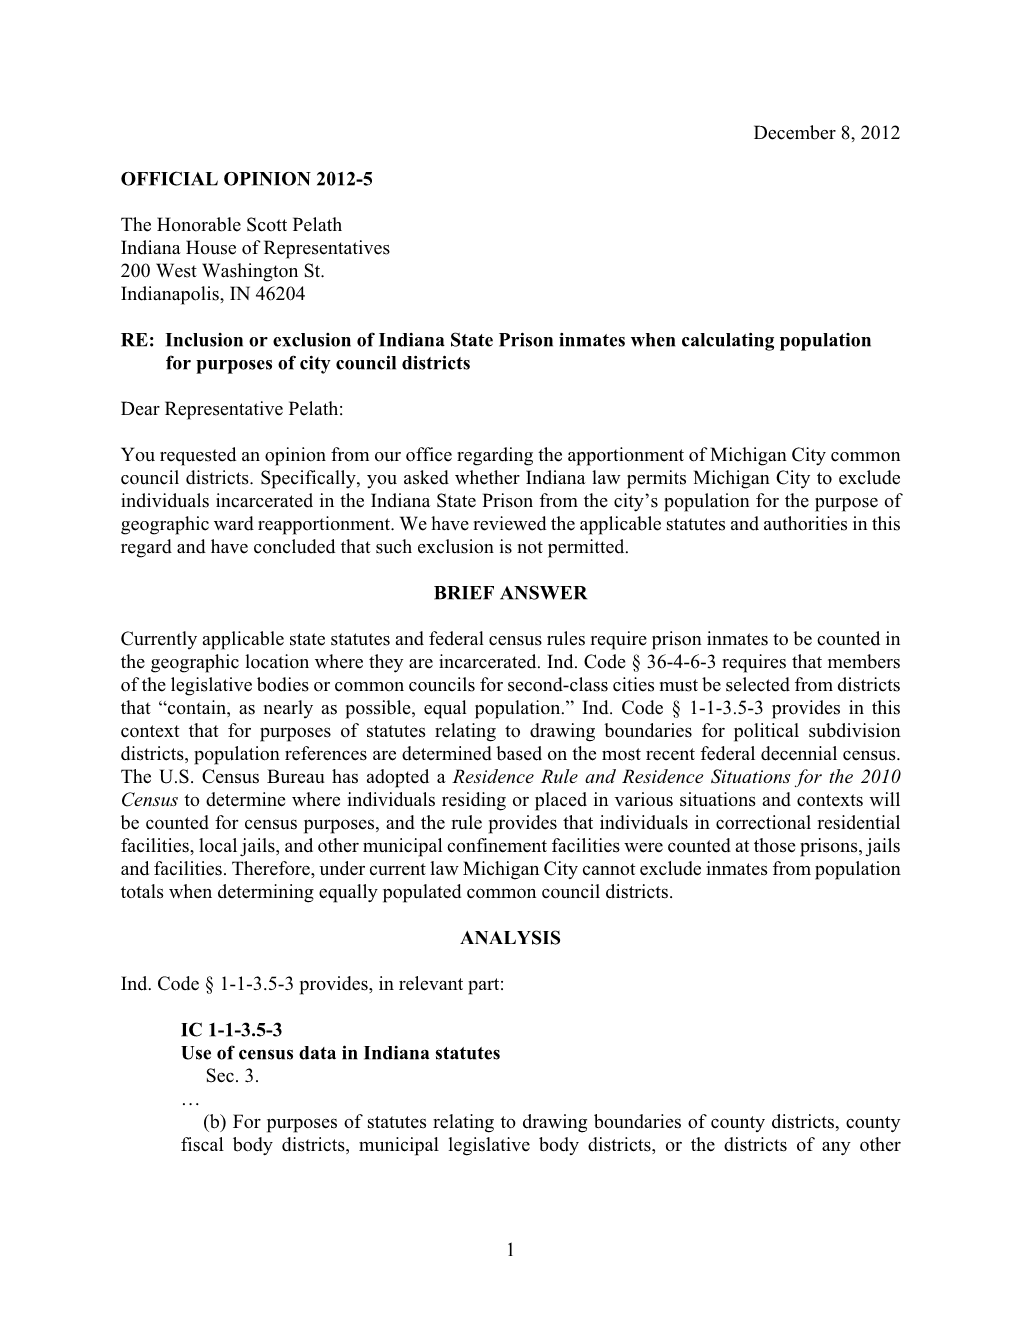 Official-Opinion-2012-5.Pdf